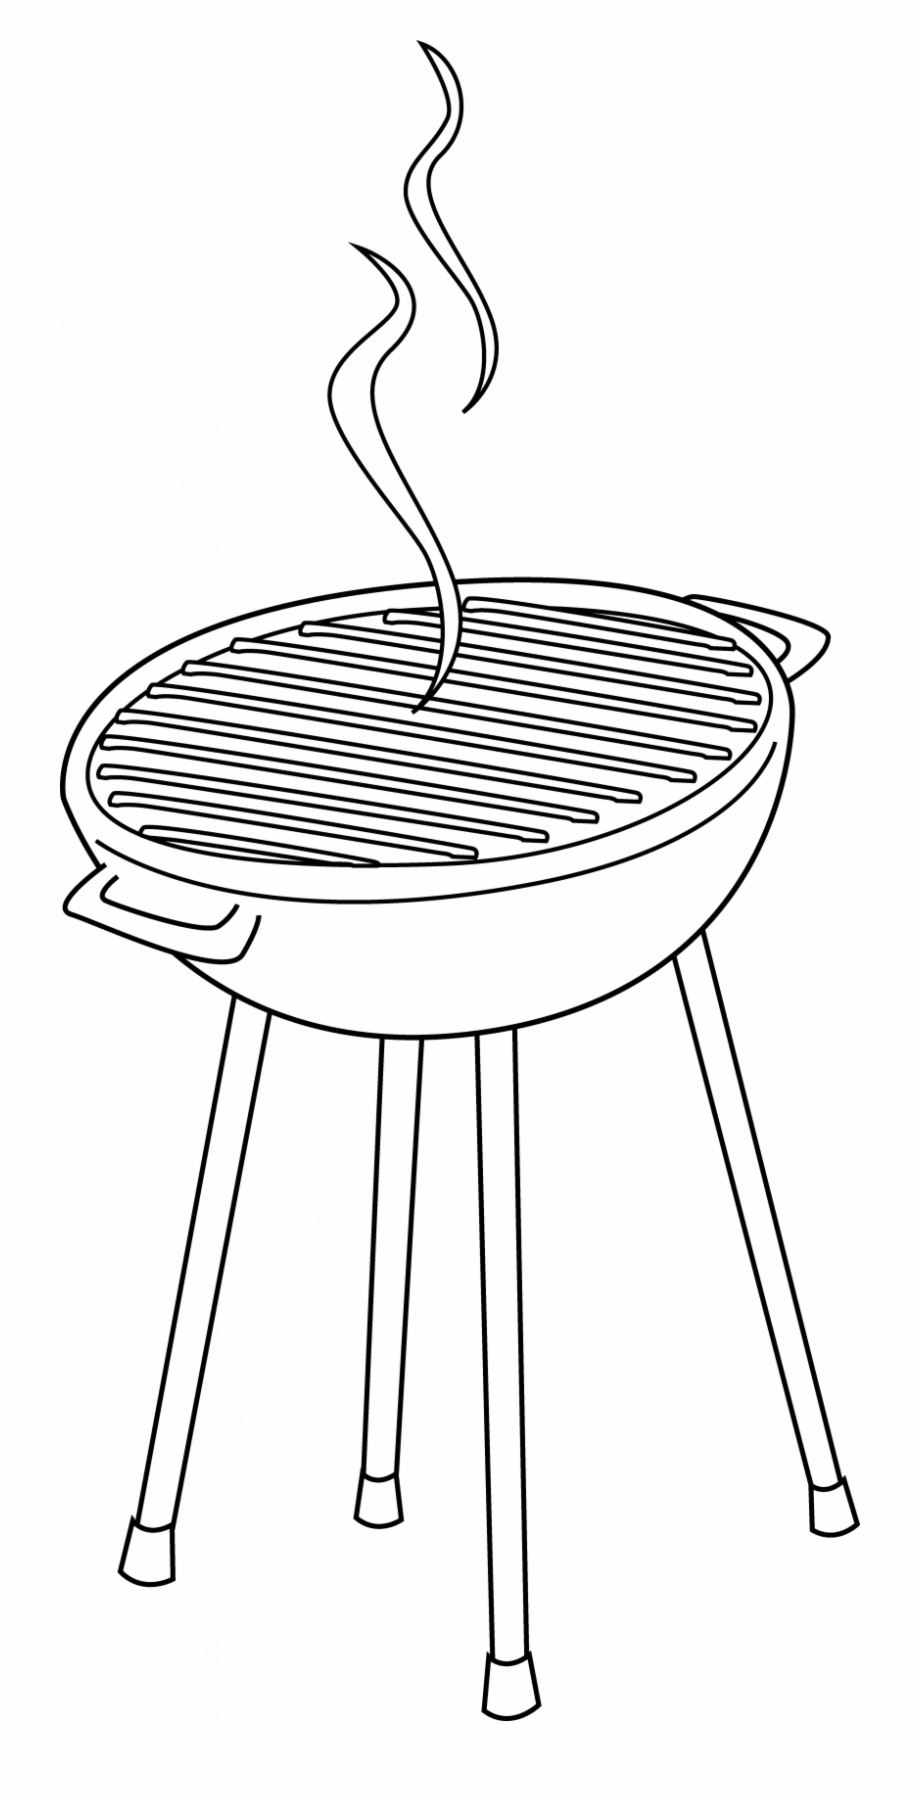 Barbeque Grill Clip Art Free Grill Clipart Black